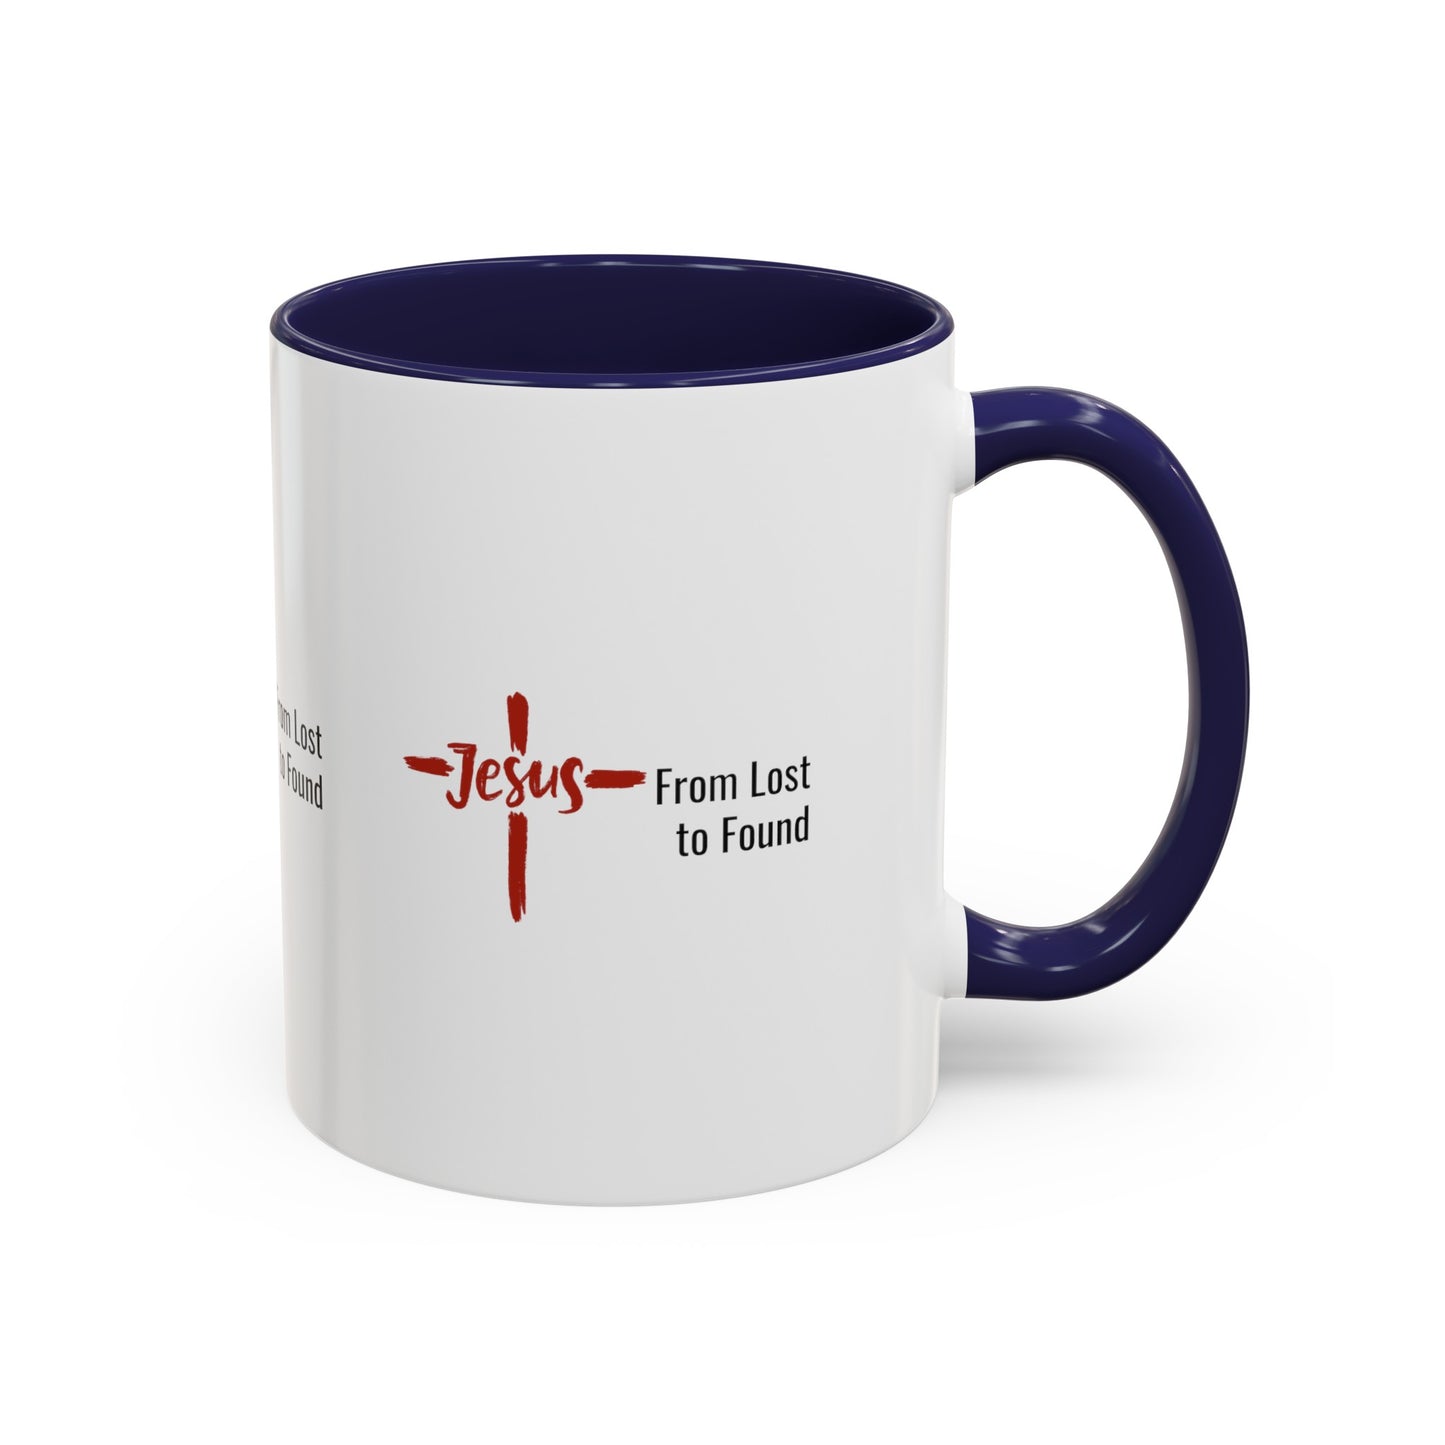 Enjoy sipping your favorite beverage from this Jesus From Lost to Found mug. Shop SmithRidge.farm for #FaithLife merchandise.